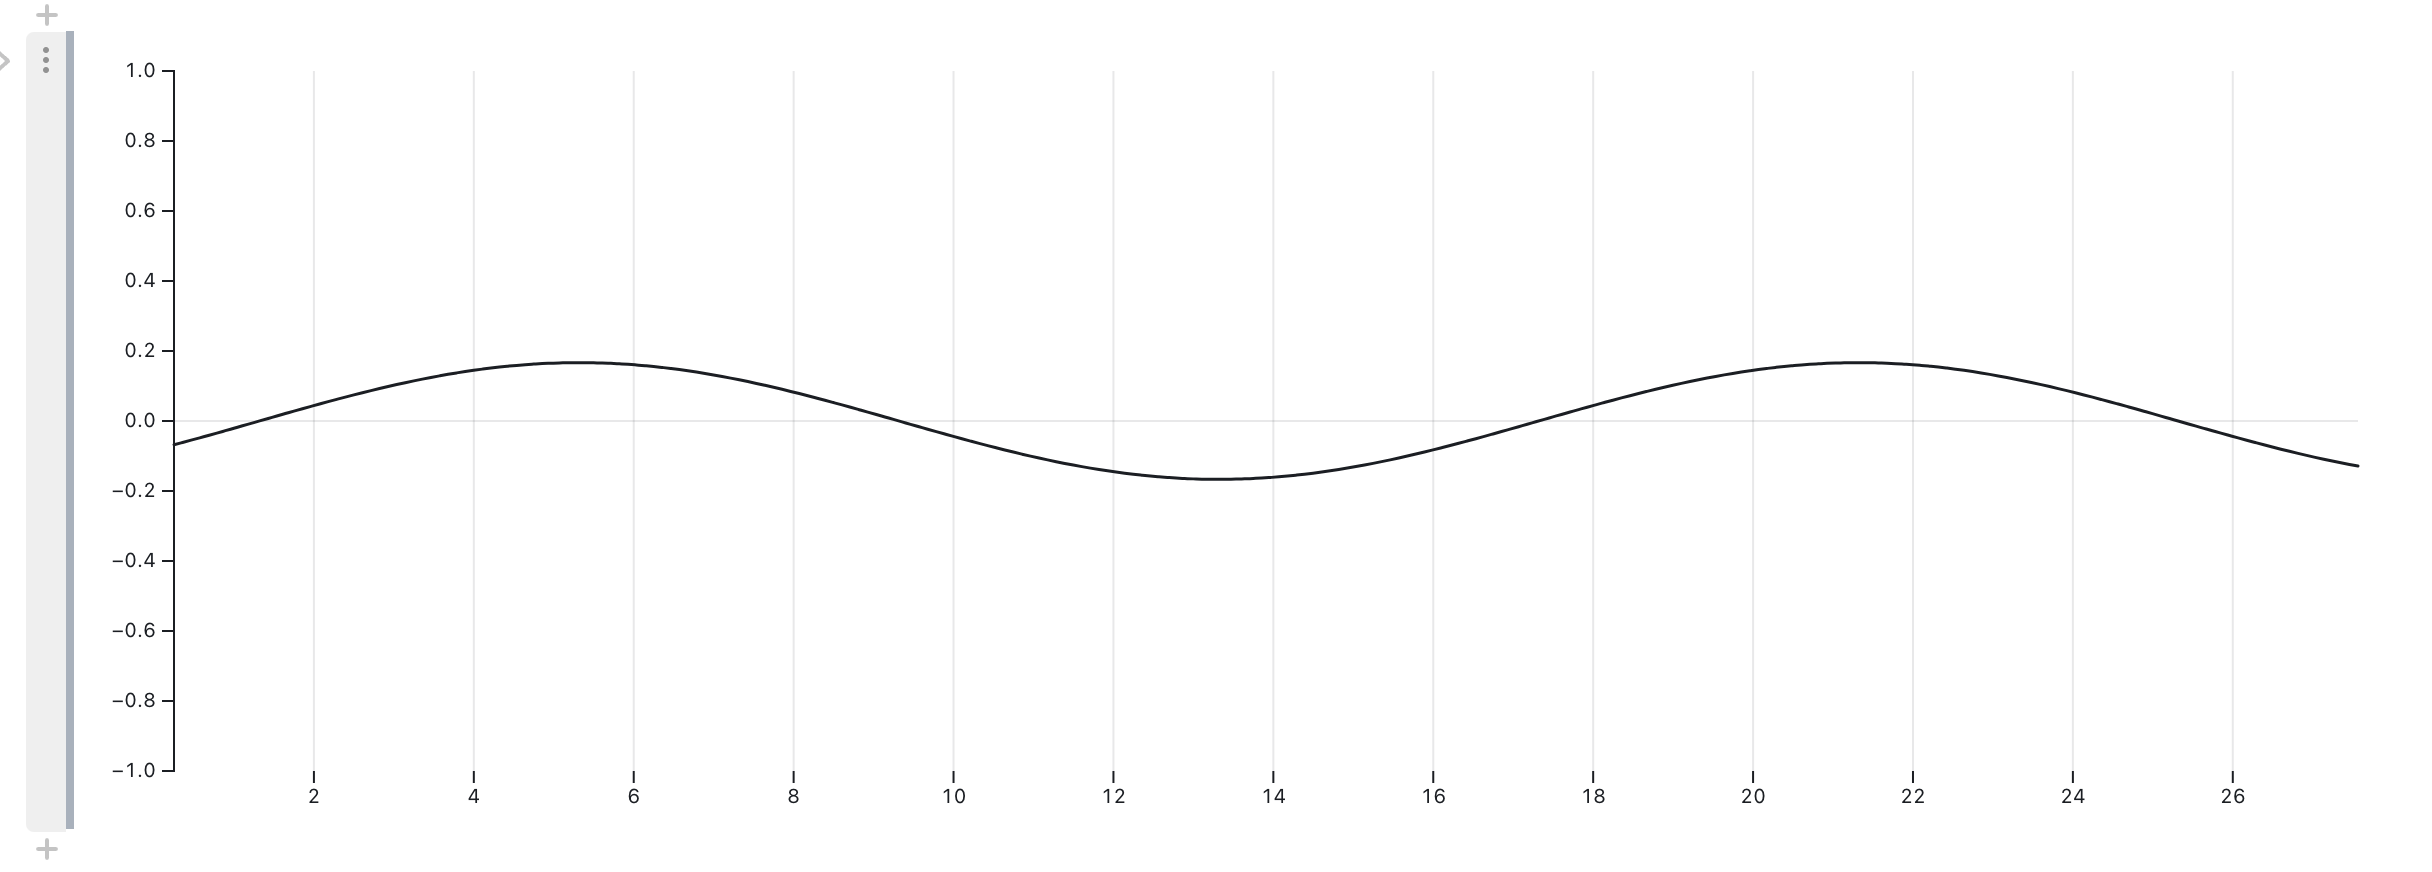 A fairly smooth sine wave with low frequency and low amplitude